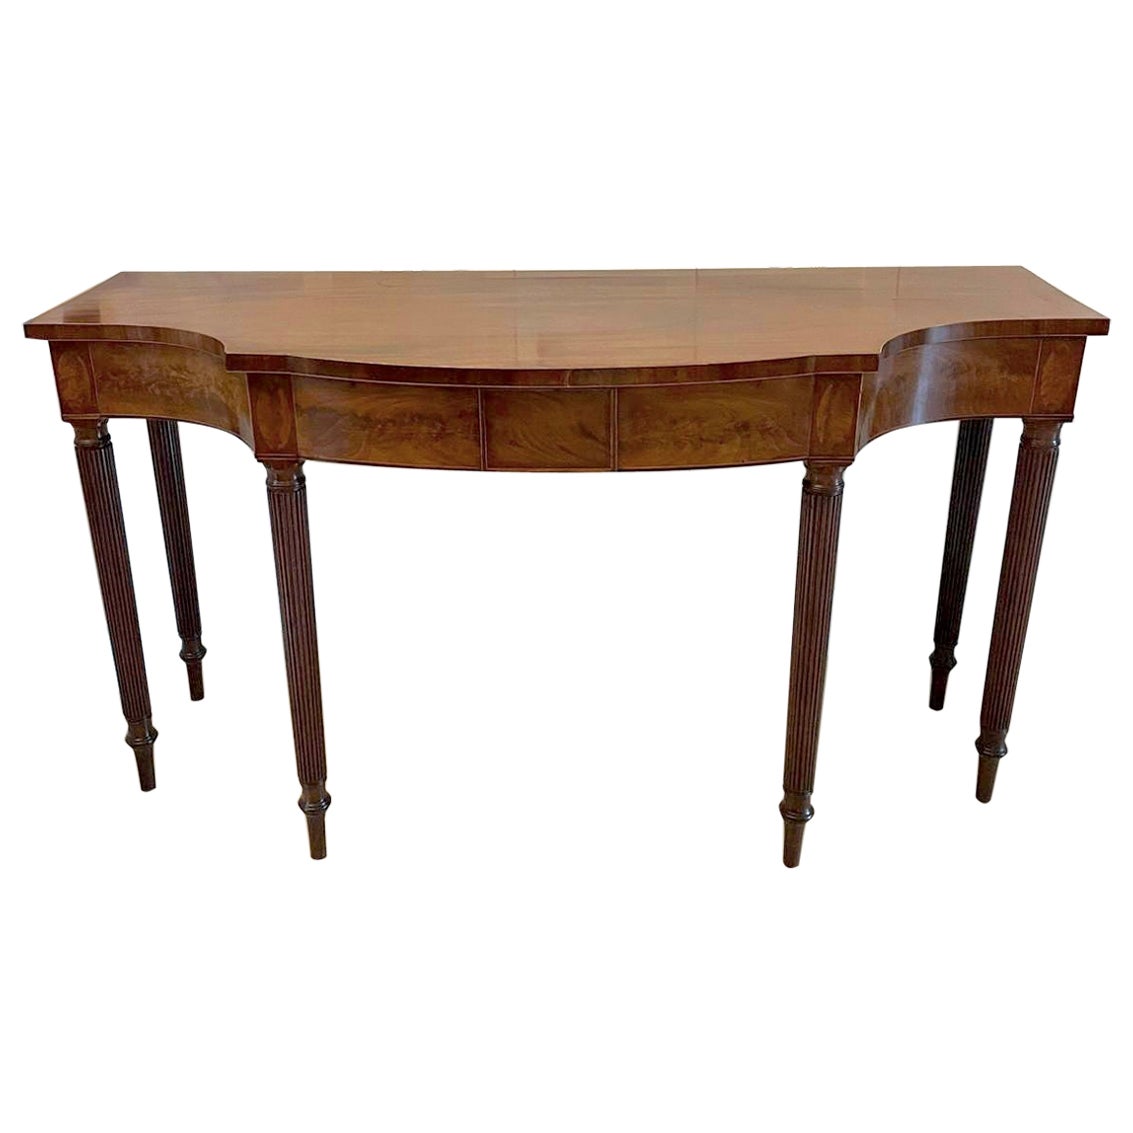 Outstanding Quality Antique Figured Mahogany Serpentine Shaped Serving Table